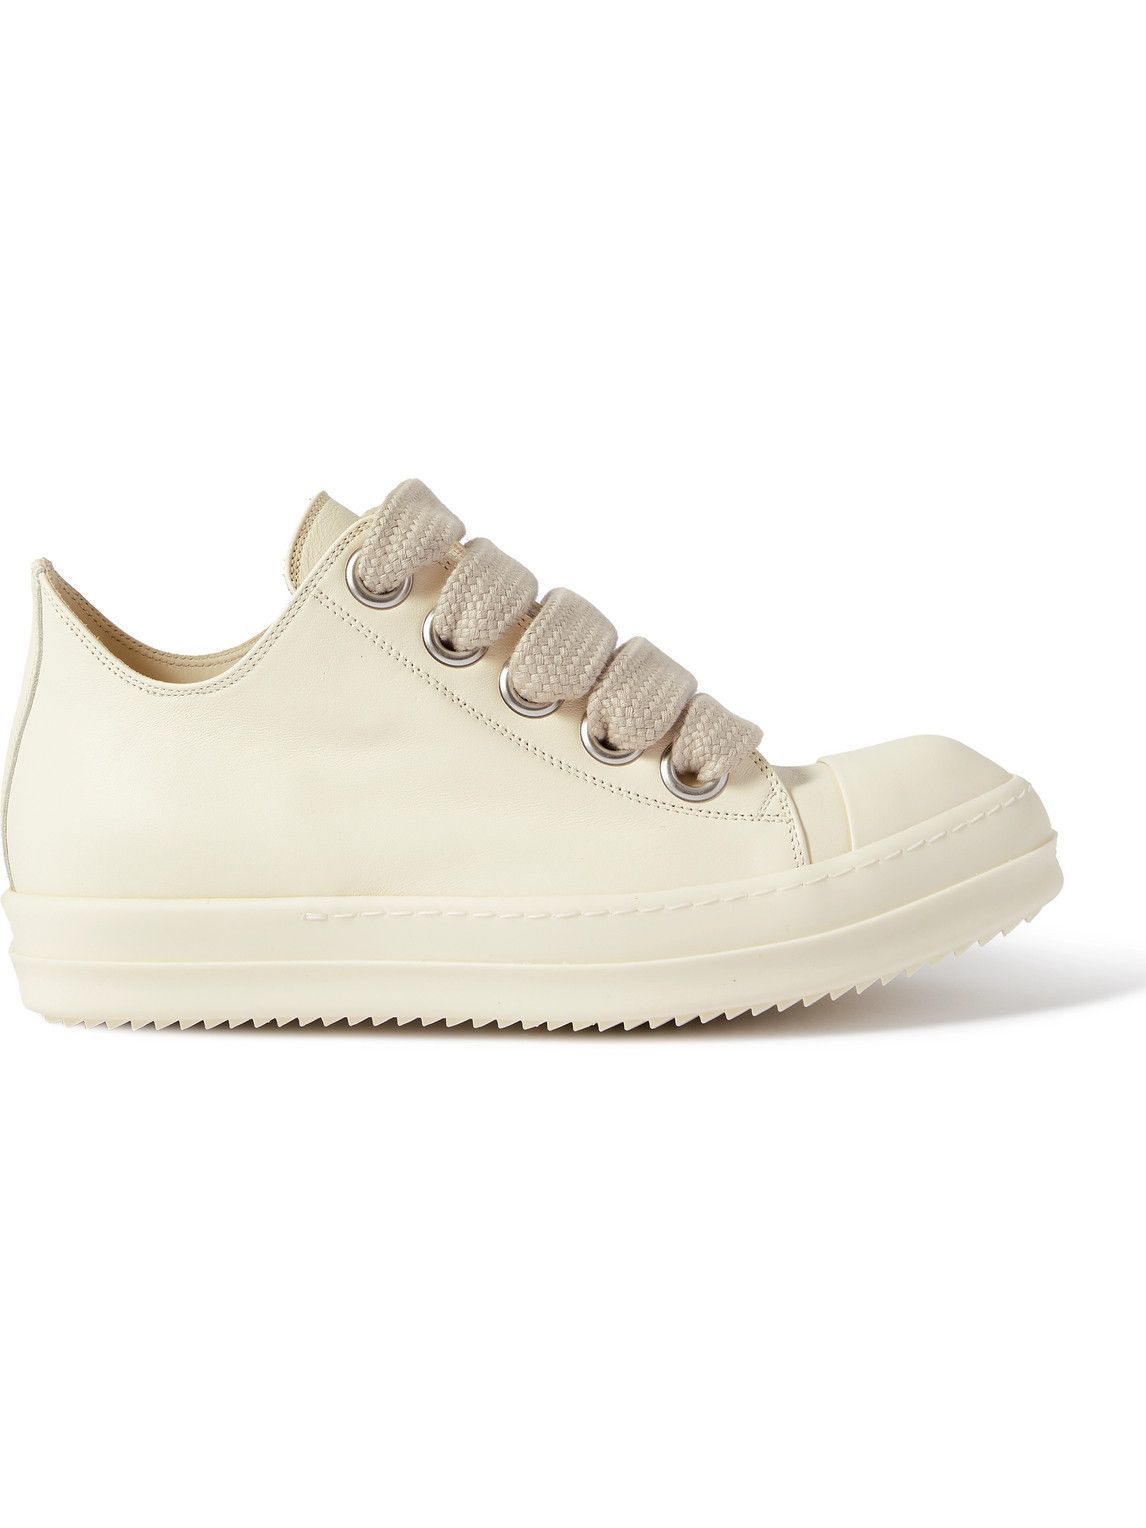 Rick Owens - Rubber-Trimmed Leather Sneakers - Neutrals Rick Owens